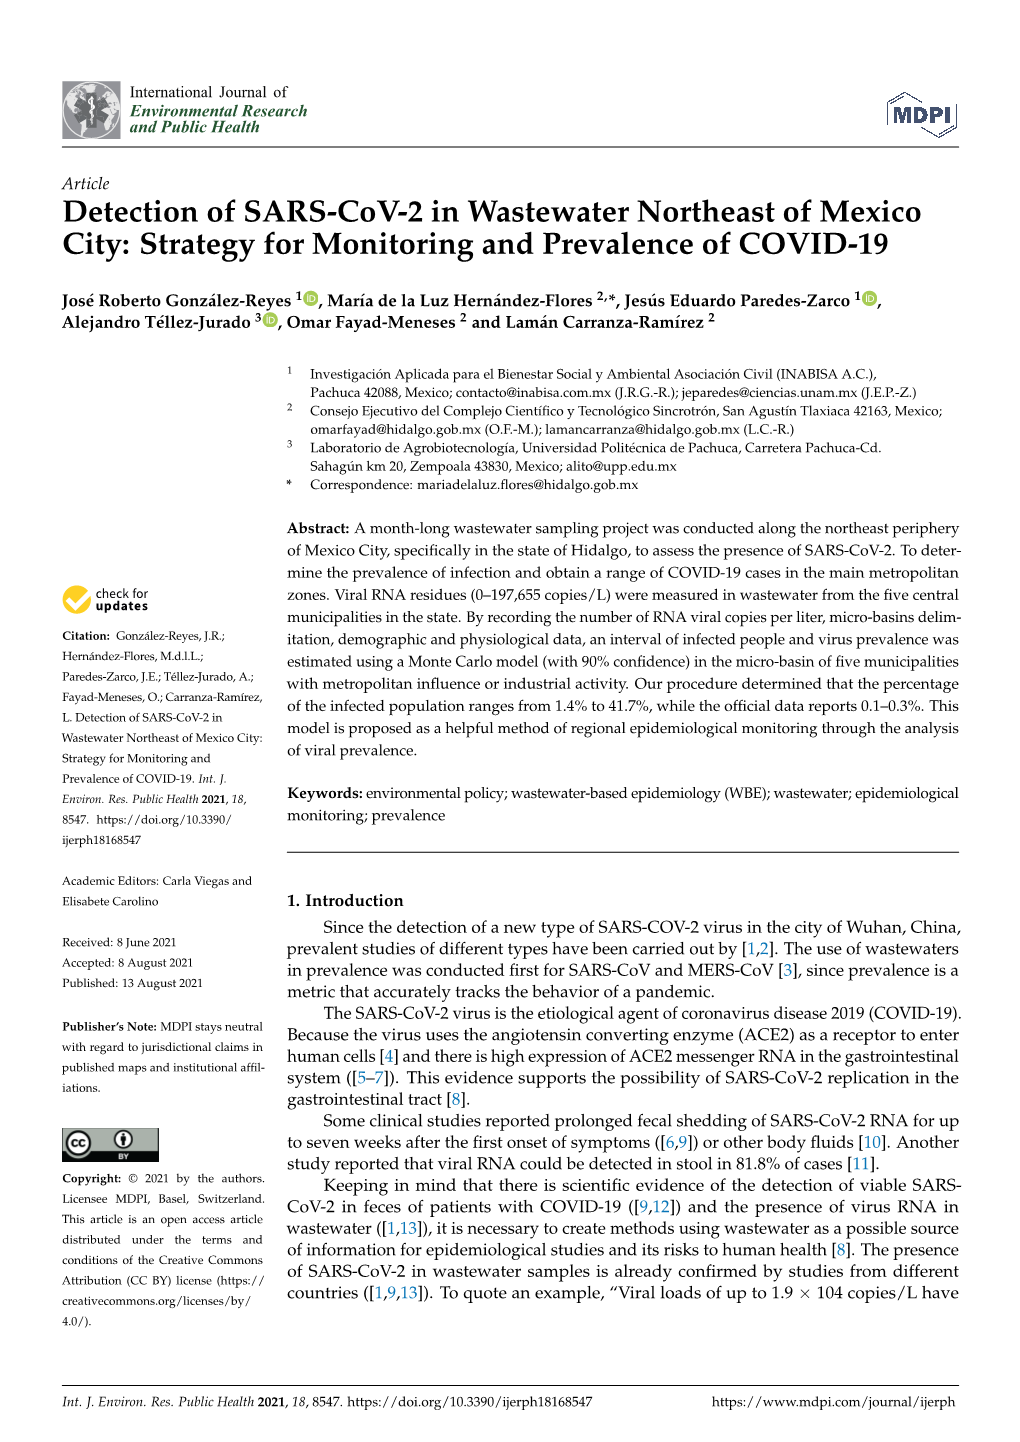 Detection of SARS-Cov-2 in Wastewater Northeast of Mexico City: Strategy for Monitoring and Prevalence of COVID-19